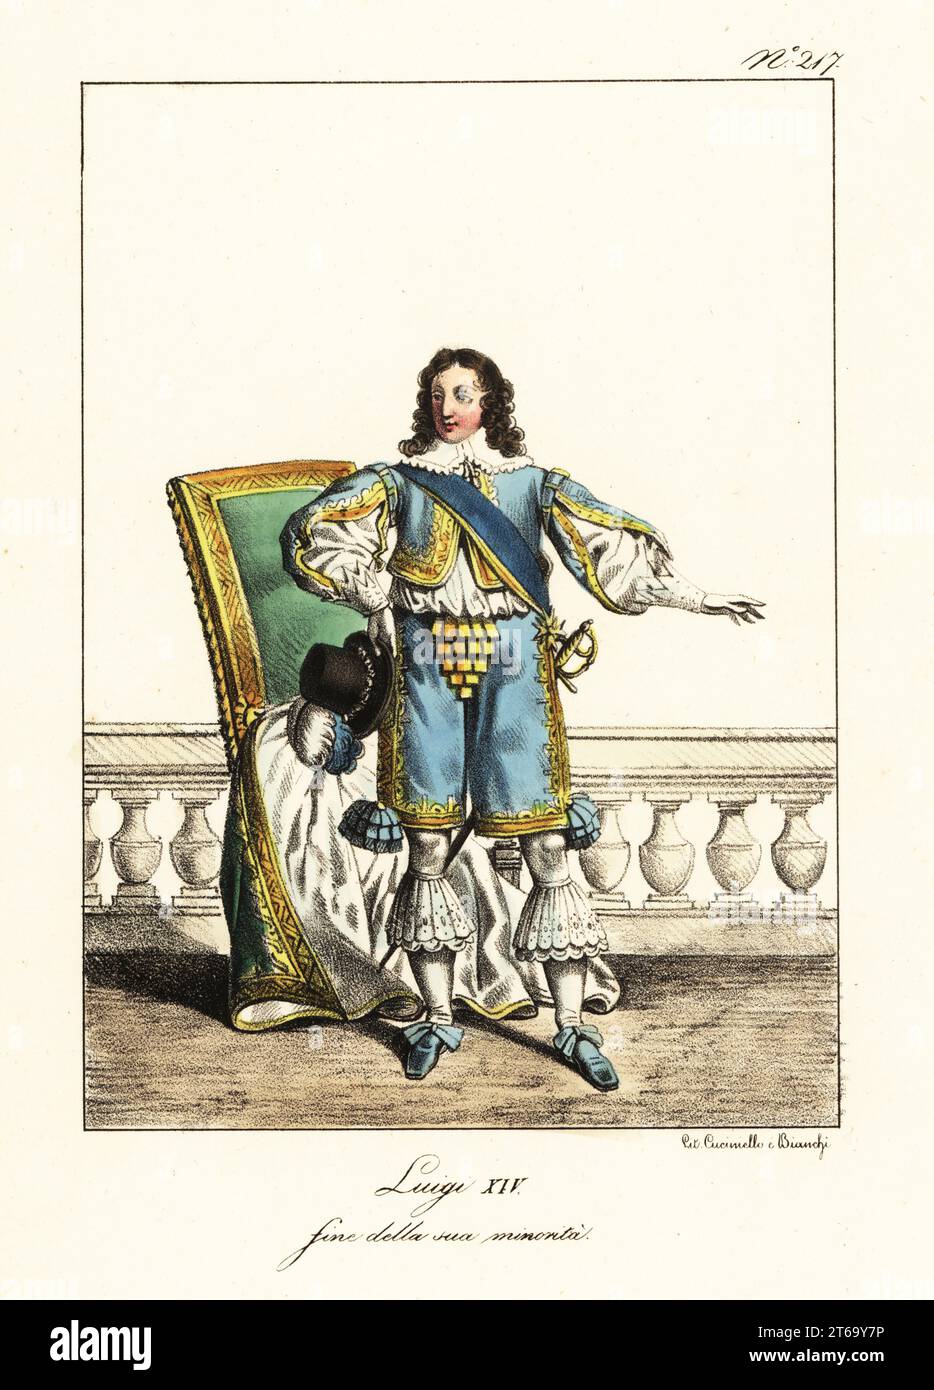 King Louis XIV of France at the end of his minority, about age 16, circa 1650. In plumed hat, lace collar, short jacket with slashed sleeves, pantalons, hose with lace garters, shoes with ribbons, court sword. Louis XIV, fin de sa minorite. Handcoloured lithograph by Lorenzo Bianchi and Domenico Cuciniello after Hippolyte Lecomte from Costumi civili e militari della monarchia francese dal 1200 al 1820, Naples, 1825. Italian edition of Lecomtes Civilian and military costumes of the French monarchy from 1200 to 1820. Stock Photo